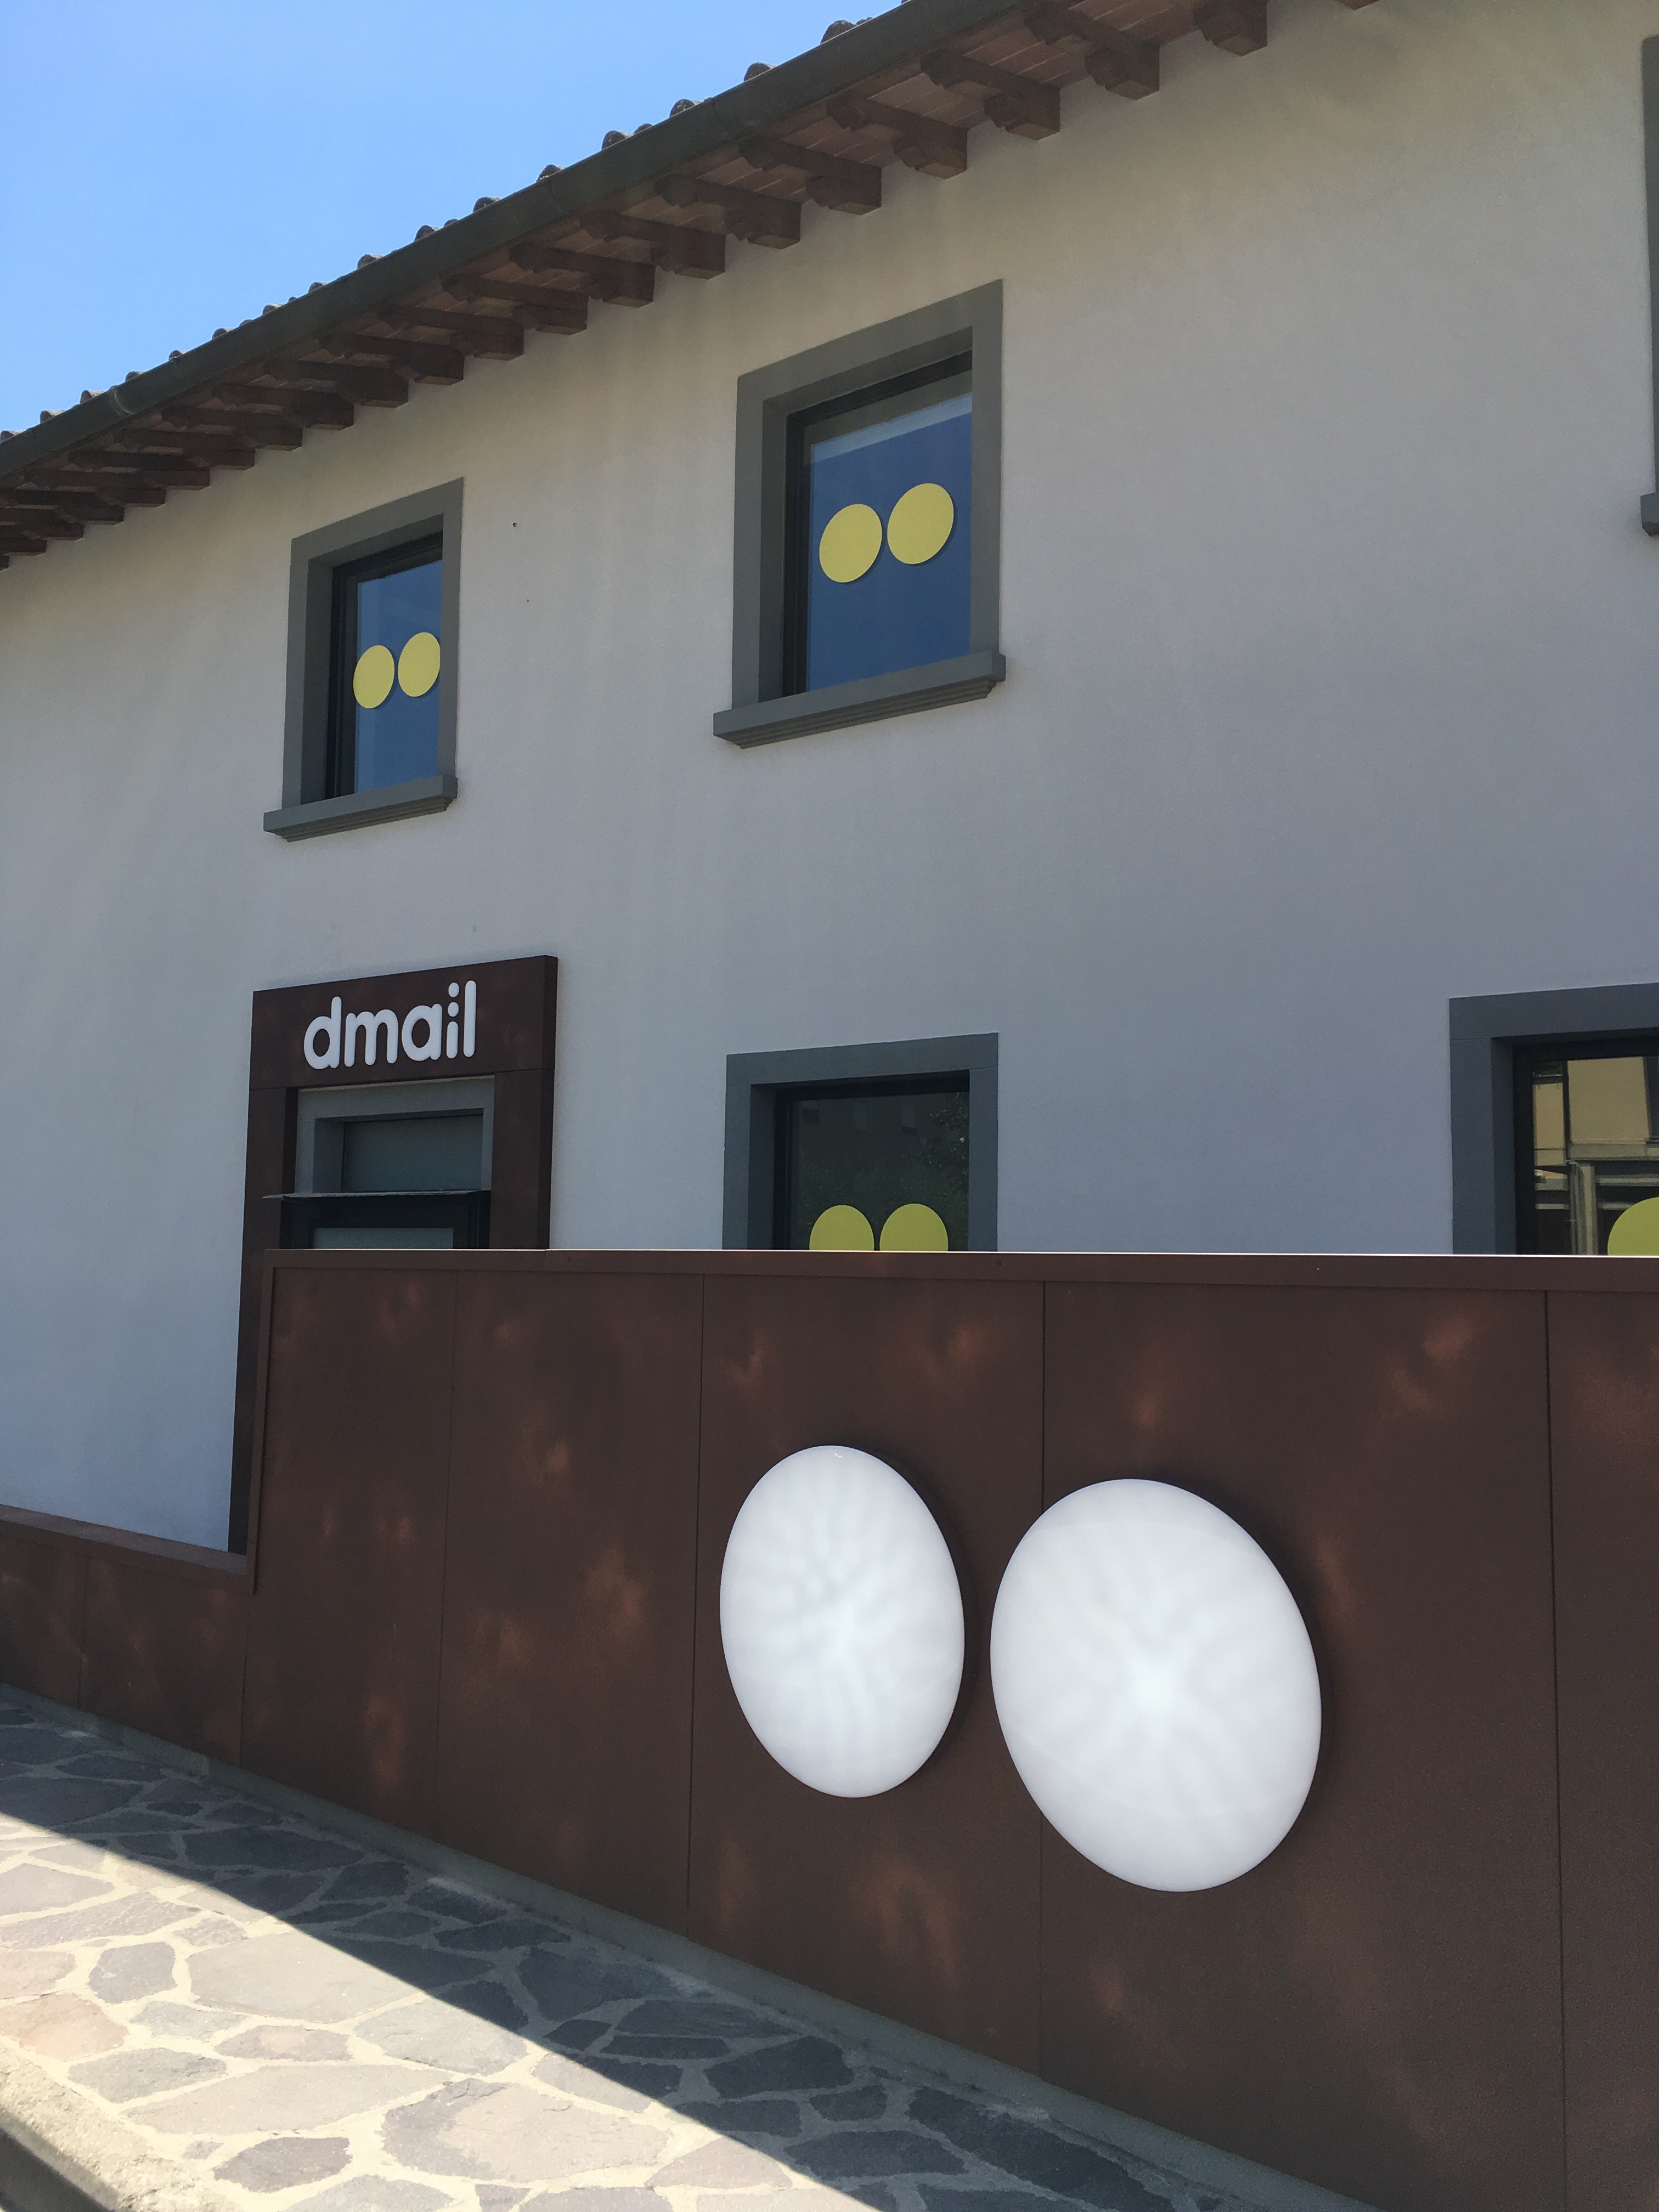 dmail new headquarters